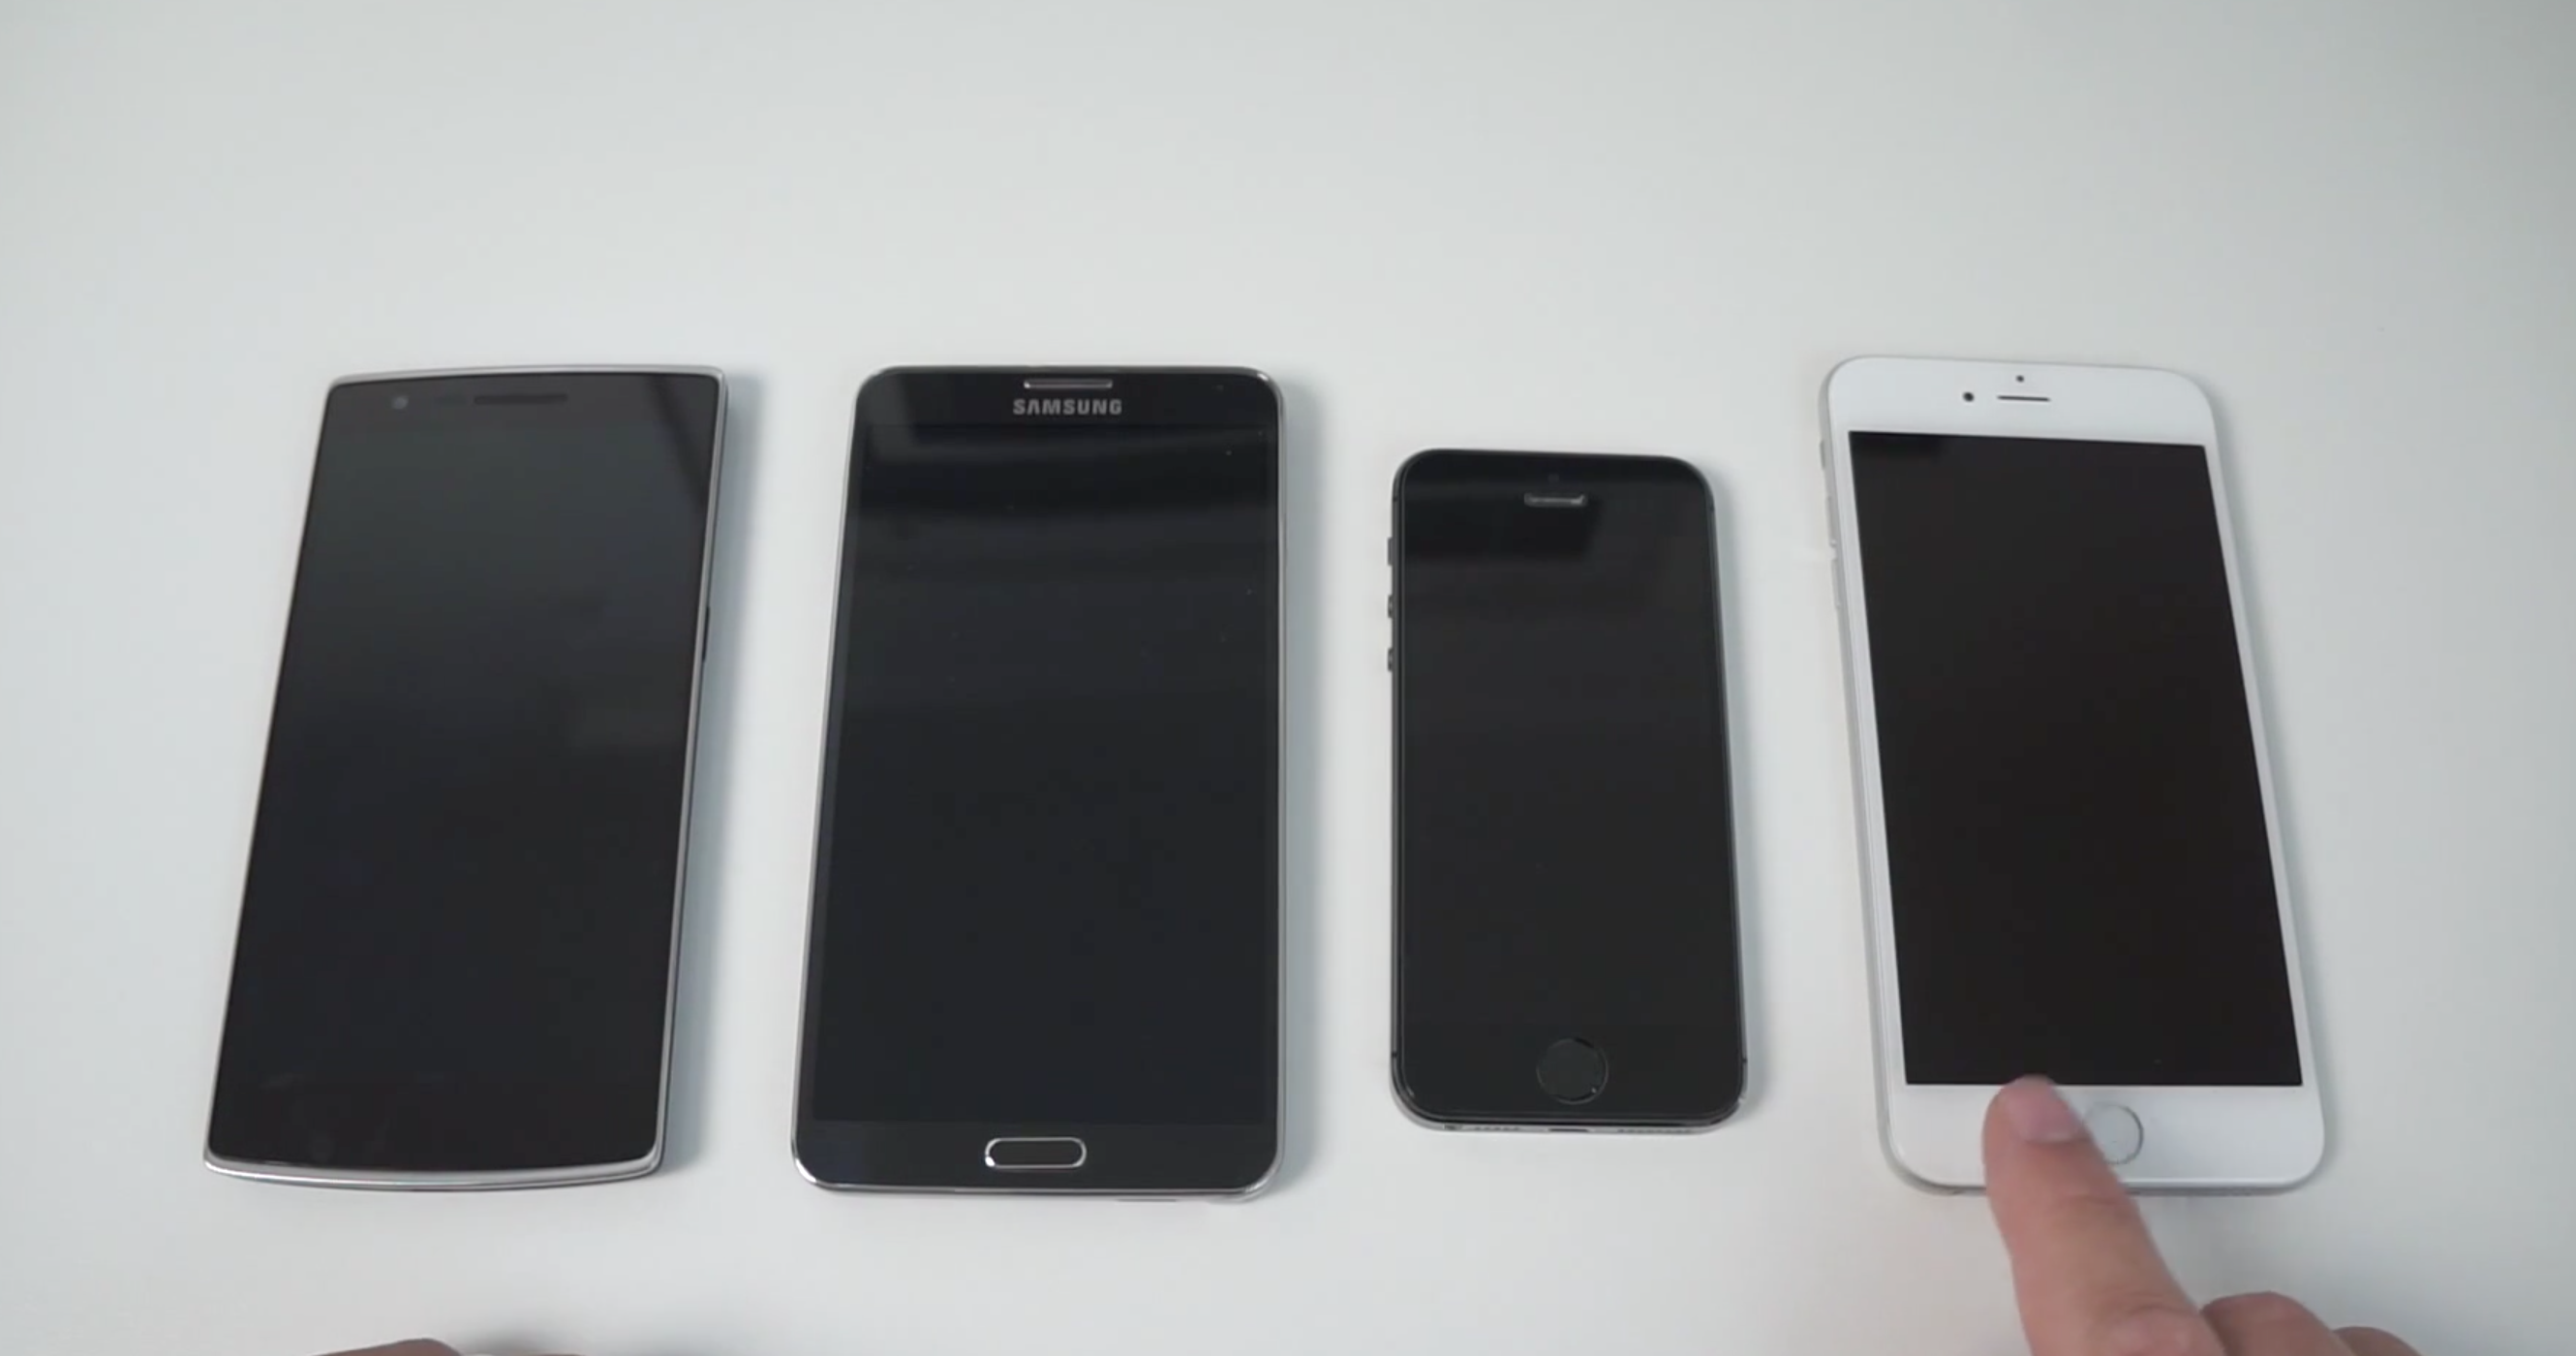 iPhone 6 Plus vs ONEPLUS One vs Galaxy Note 3 vs iPhone 5s – Benchmark Shootout